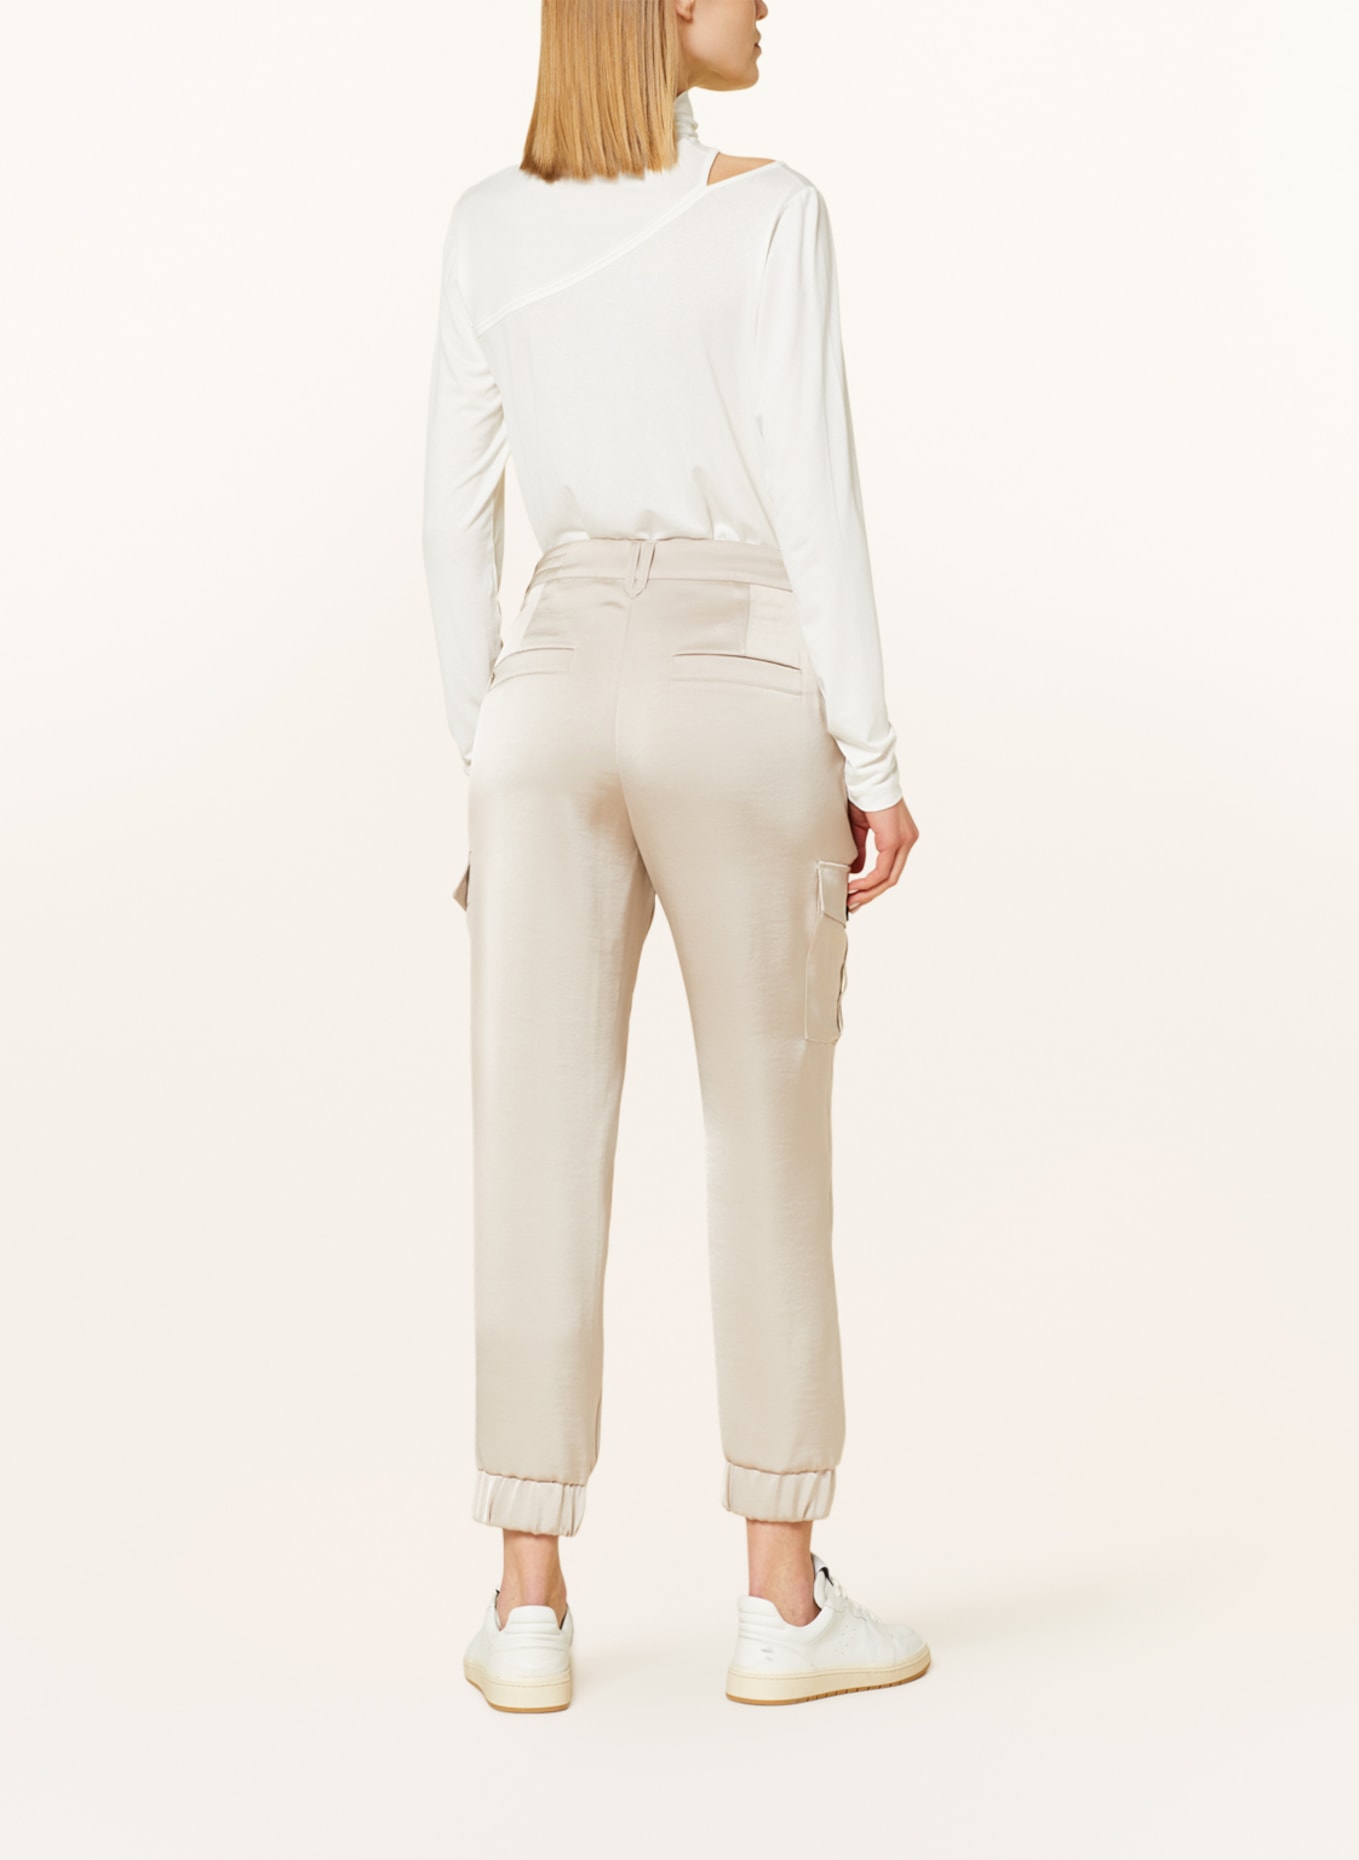 MARC CAIN Cargo trousers RIDDER made of satin, Color: 646 warm stone (Image 3)